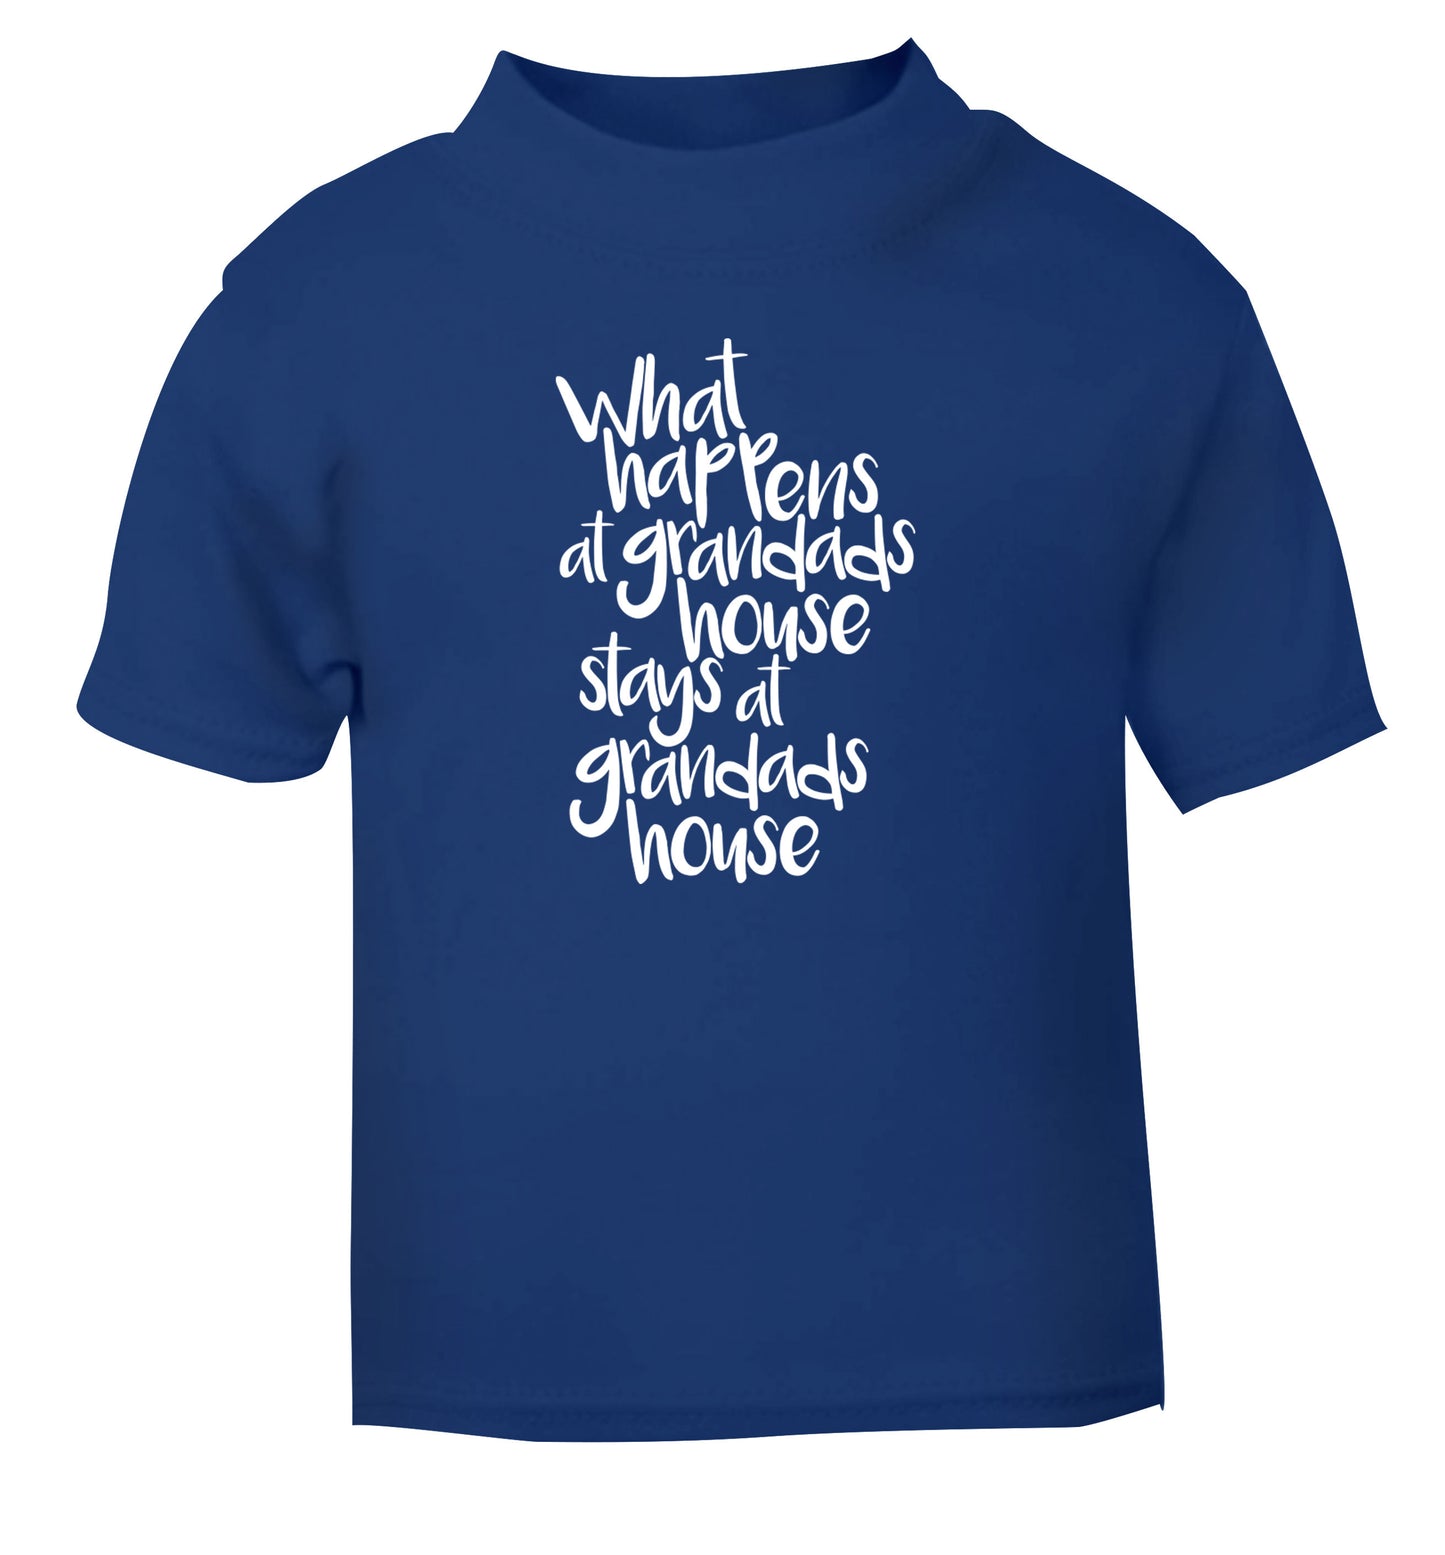 What happens at grandads house stays at grandads house blue Baby Toddler Tshirt 2 Years